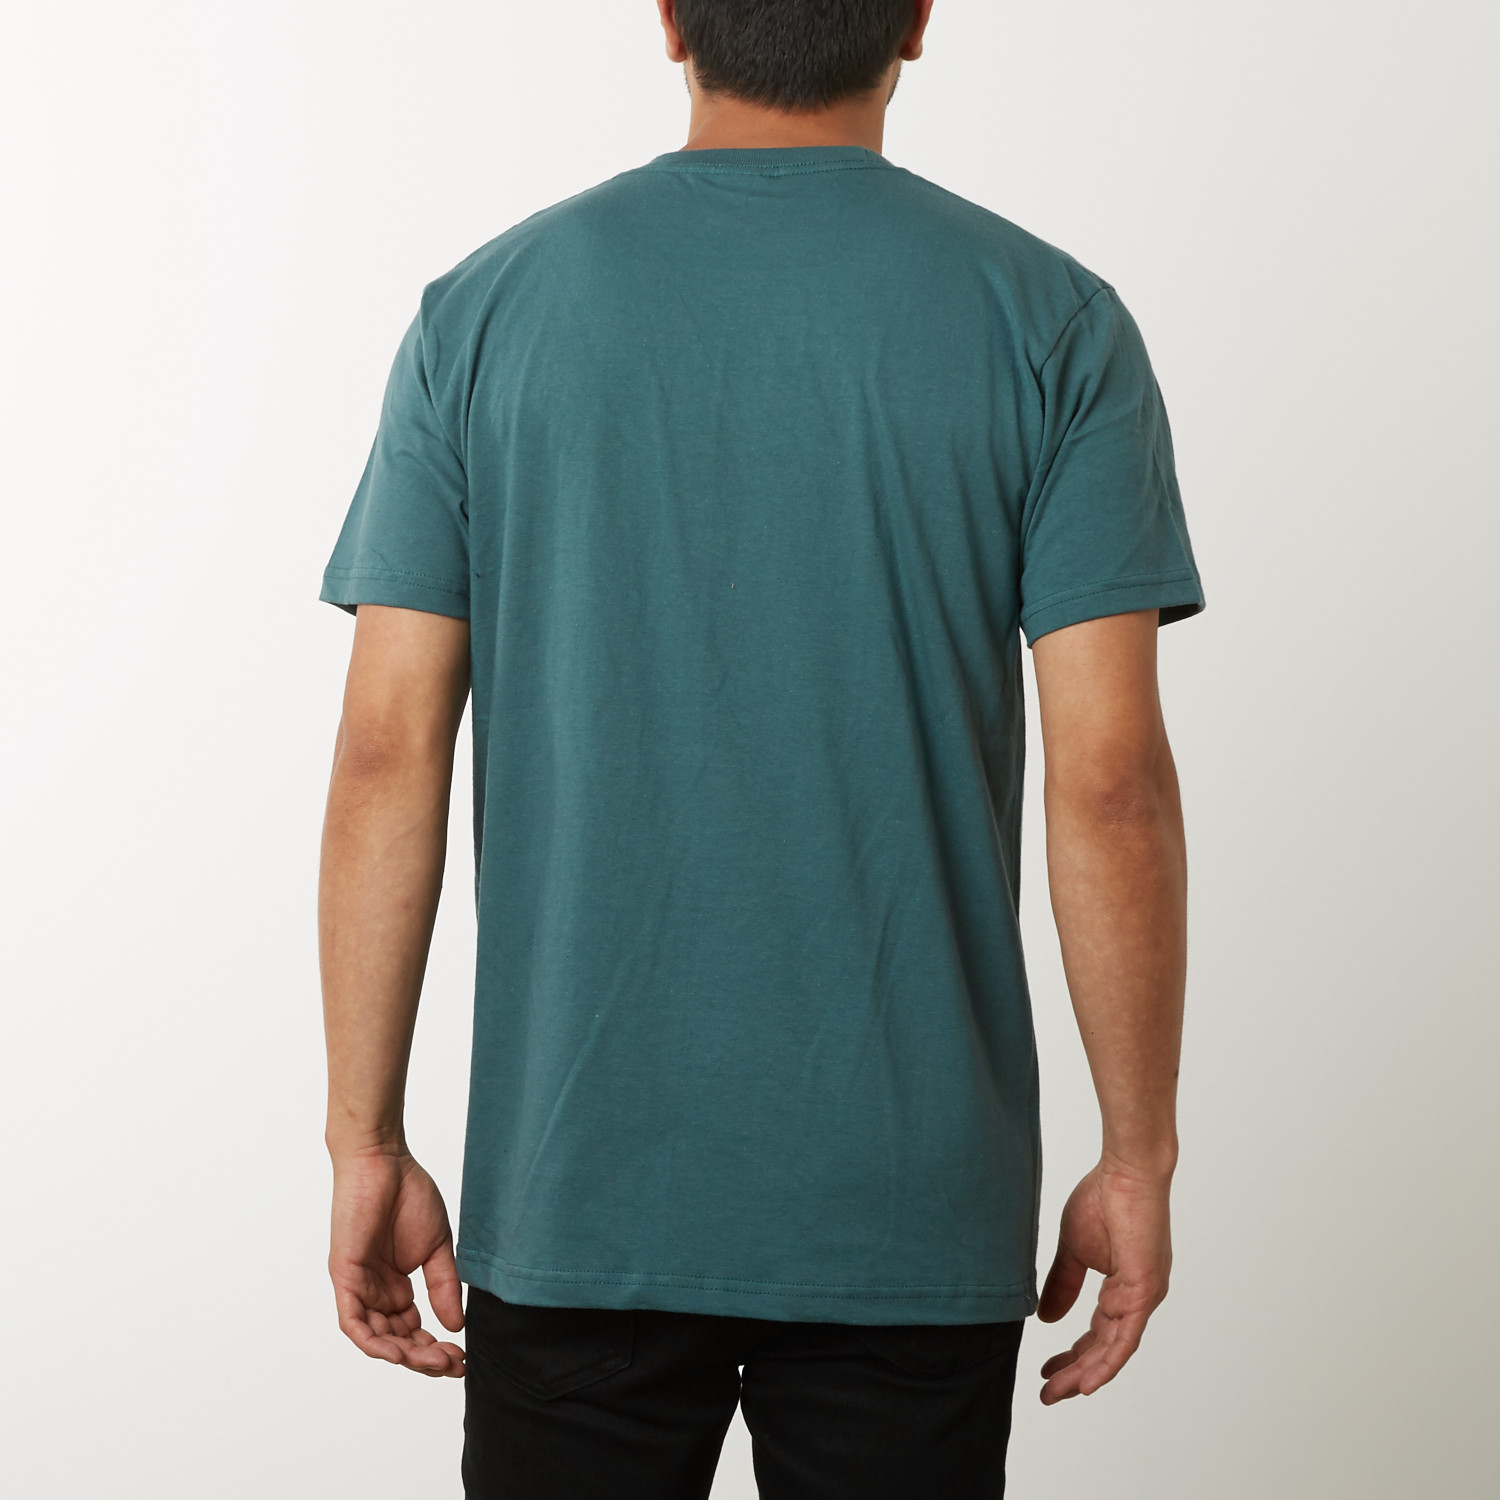 Blank T-Shirt // Dark Teal (S) - Supreme - Touch of Modern